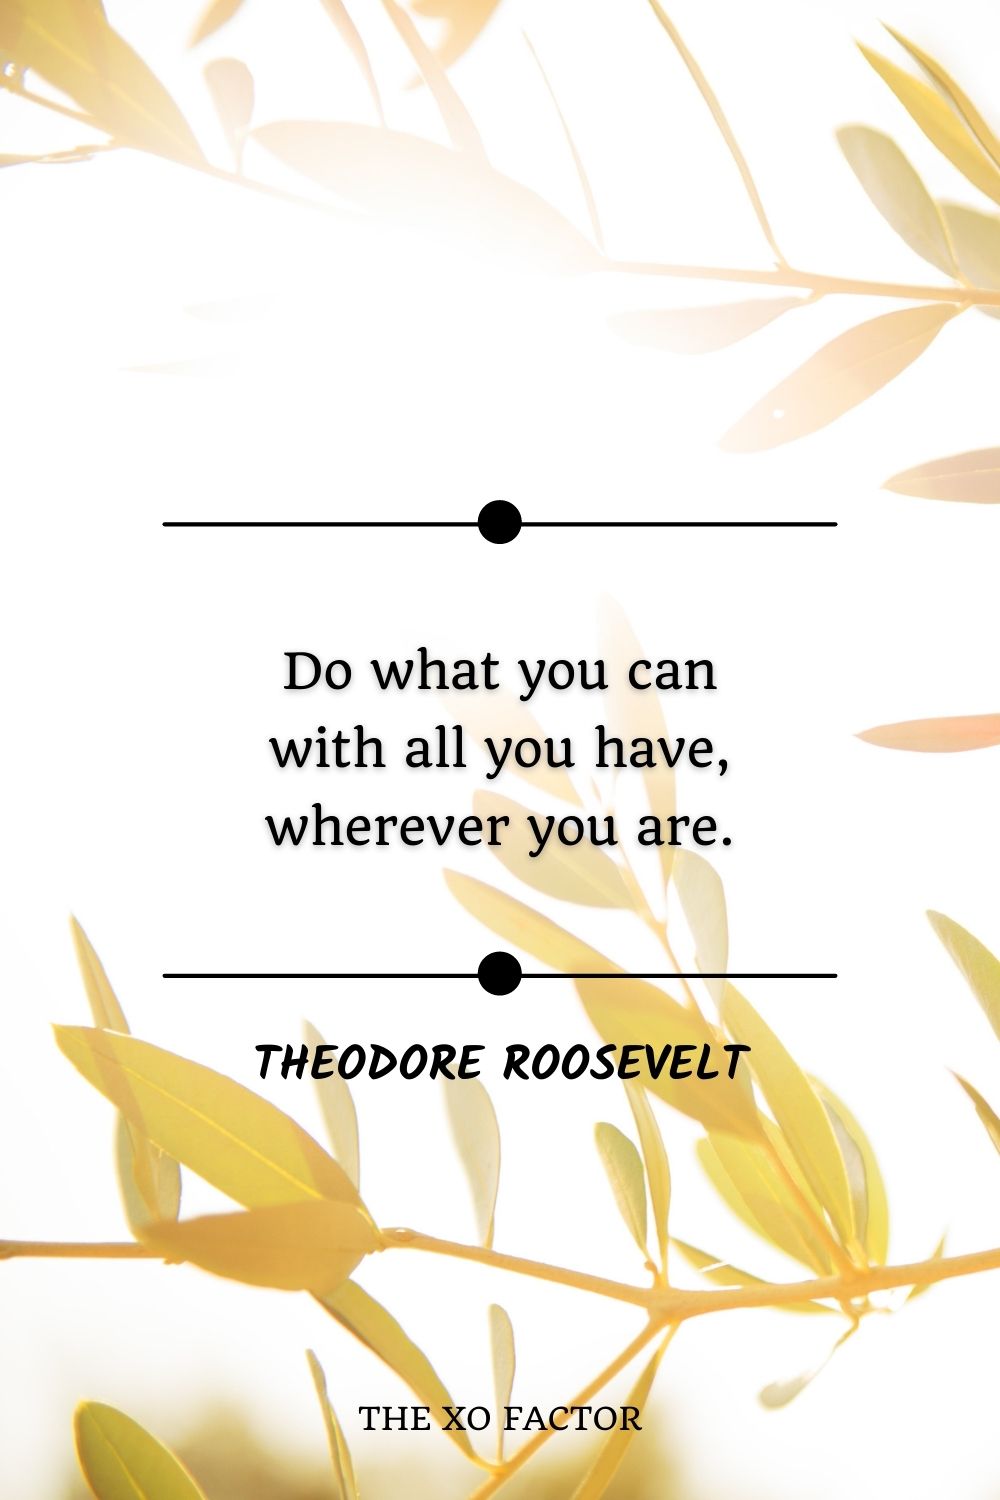 Do what you can with all you have, wherever you are.” – Theodore Roosevelt